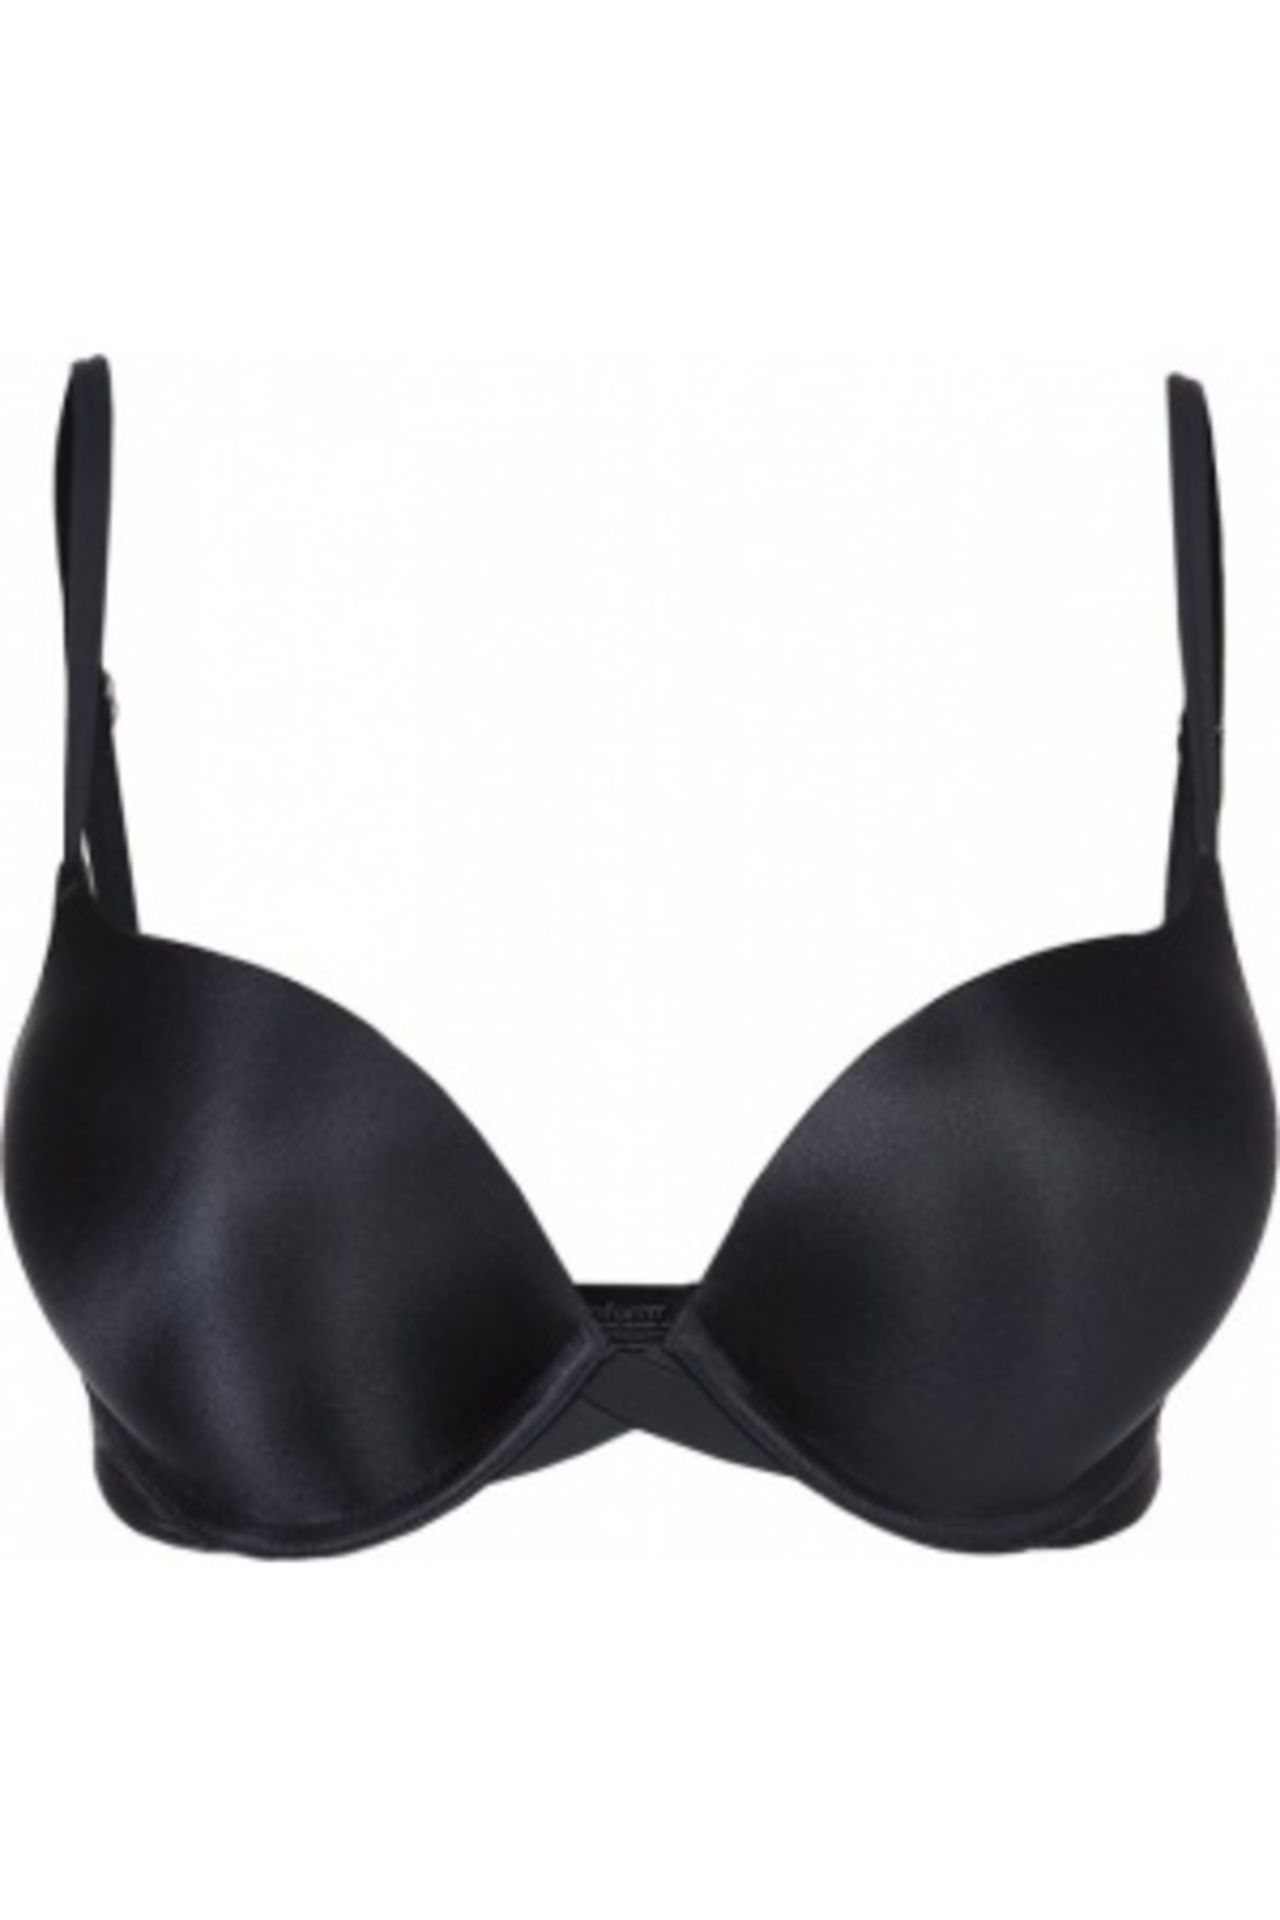 V Brand New A Lot Of Three Black Maidenform Ultimate Push Up Bras Size 32C ISP $14.99 Each (